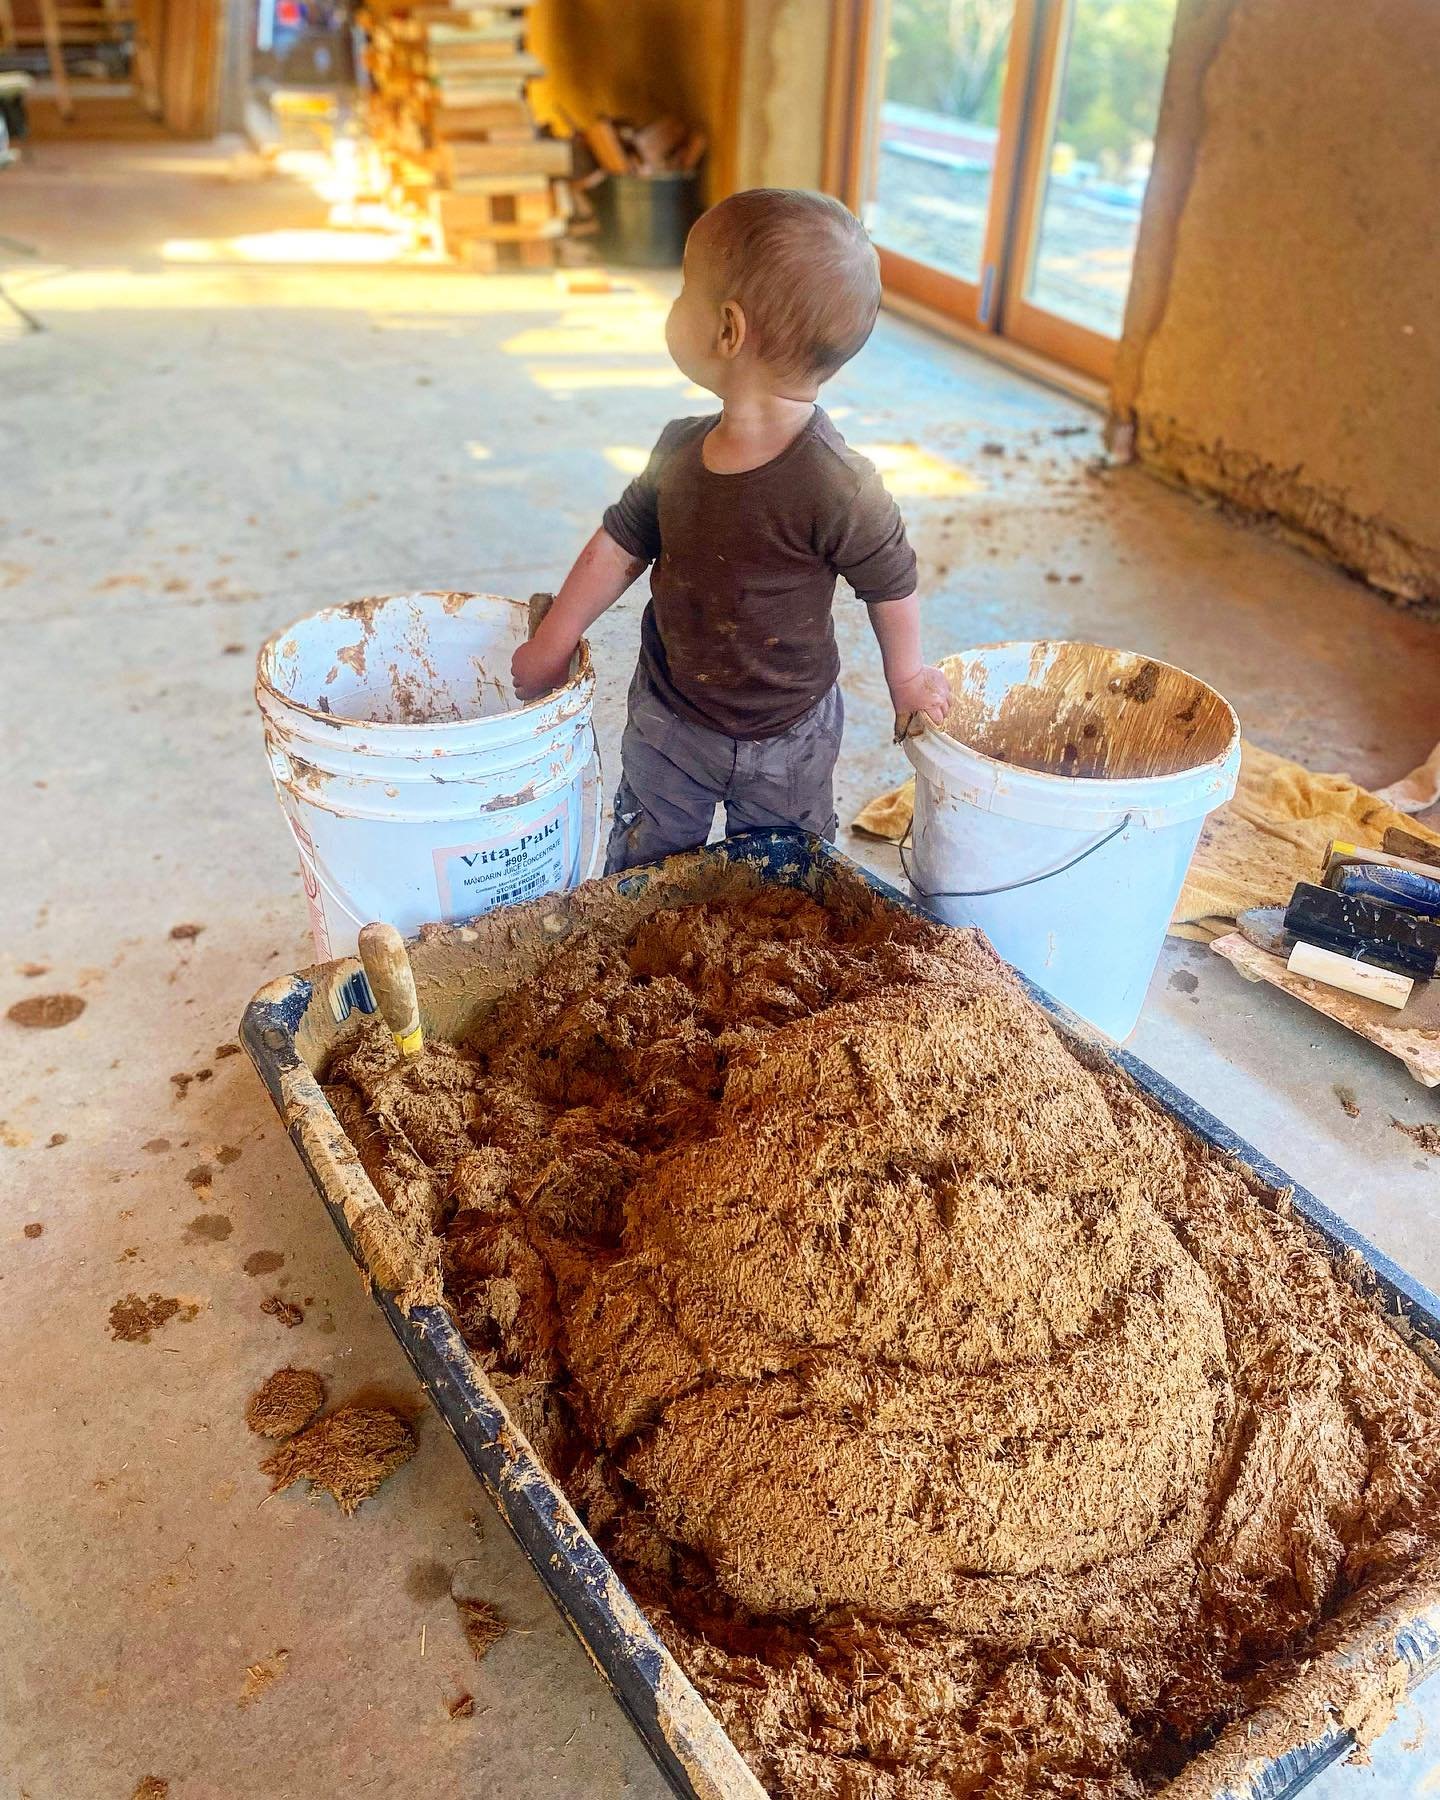 My favorite assistant. It&rsquo;s super convenient that we have buckets of mud around for our work, he doesn&rsquo;t even notice the power tools.
 #babyonthejob #earthenbuilding #earthenplaster